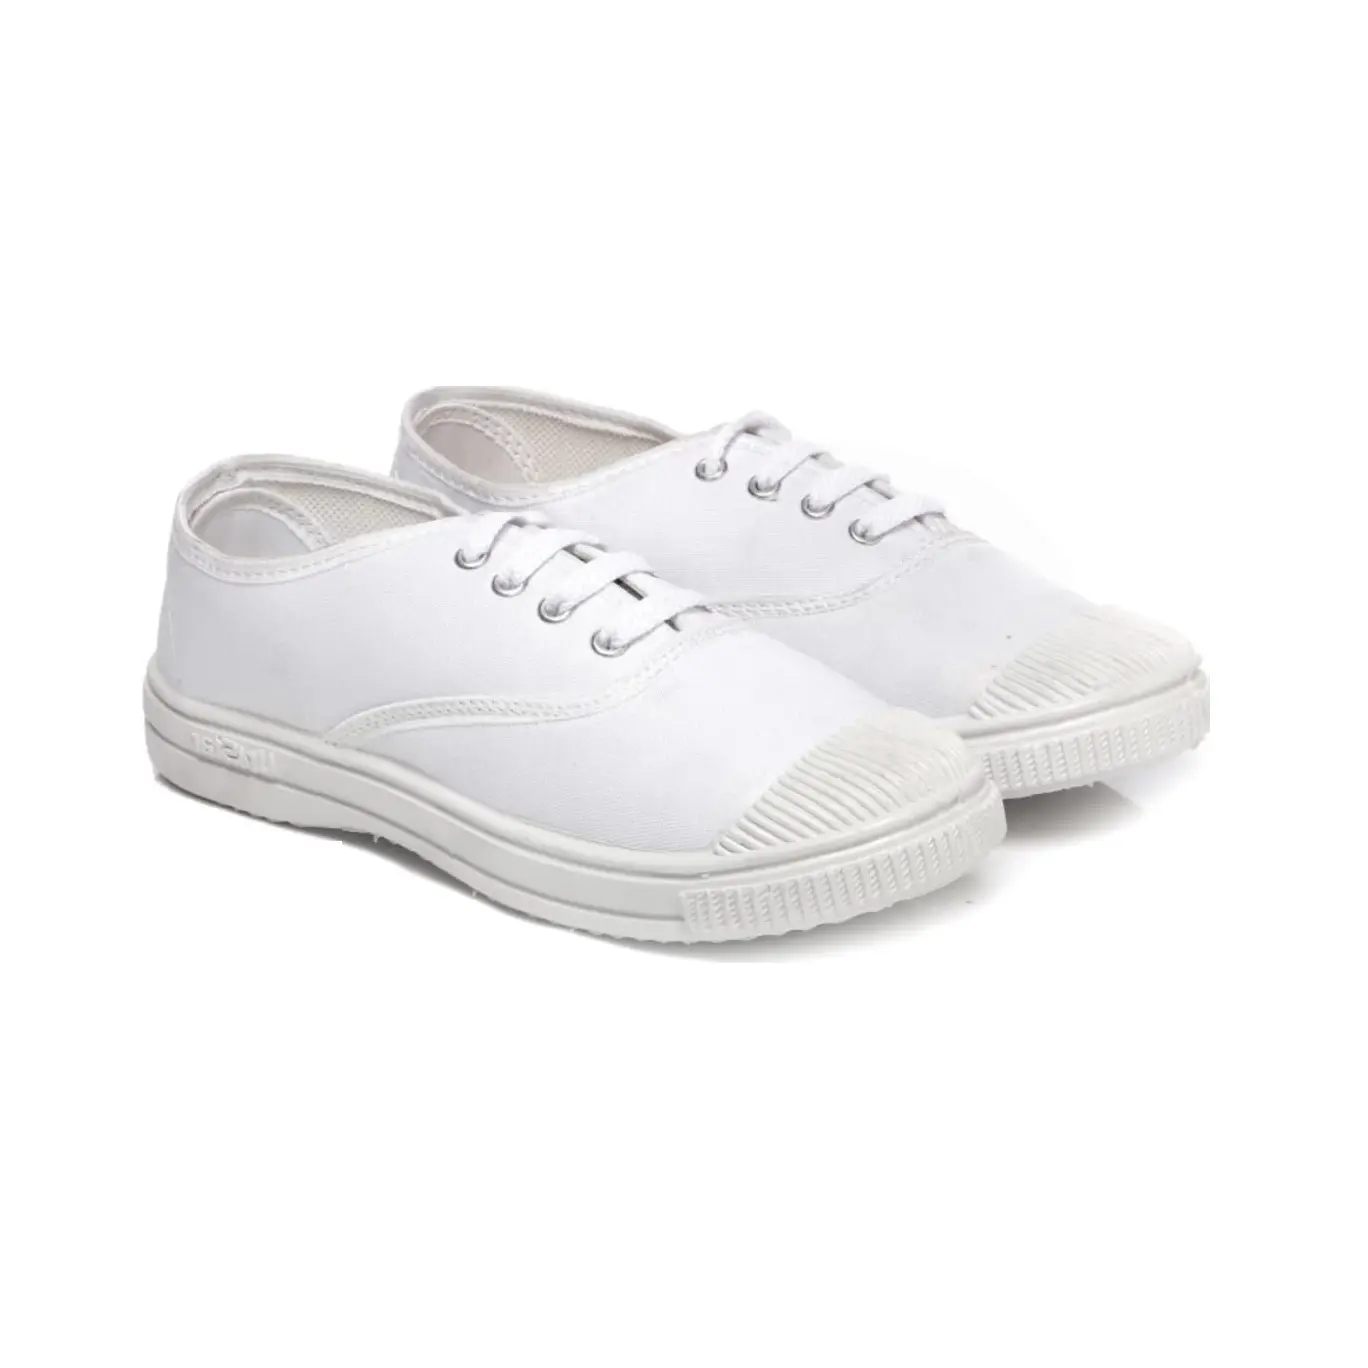 Indian Manufactured Shoes Accessories School PT Shoes for Boys and Girls Available at White Colour PT Shoes for Sale